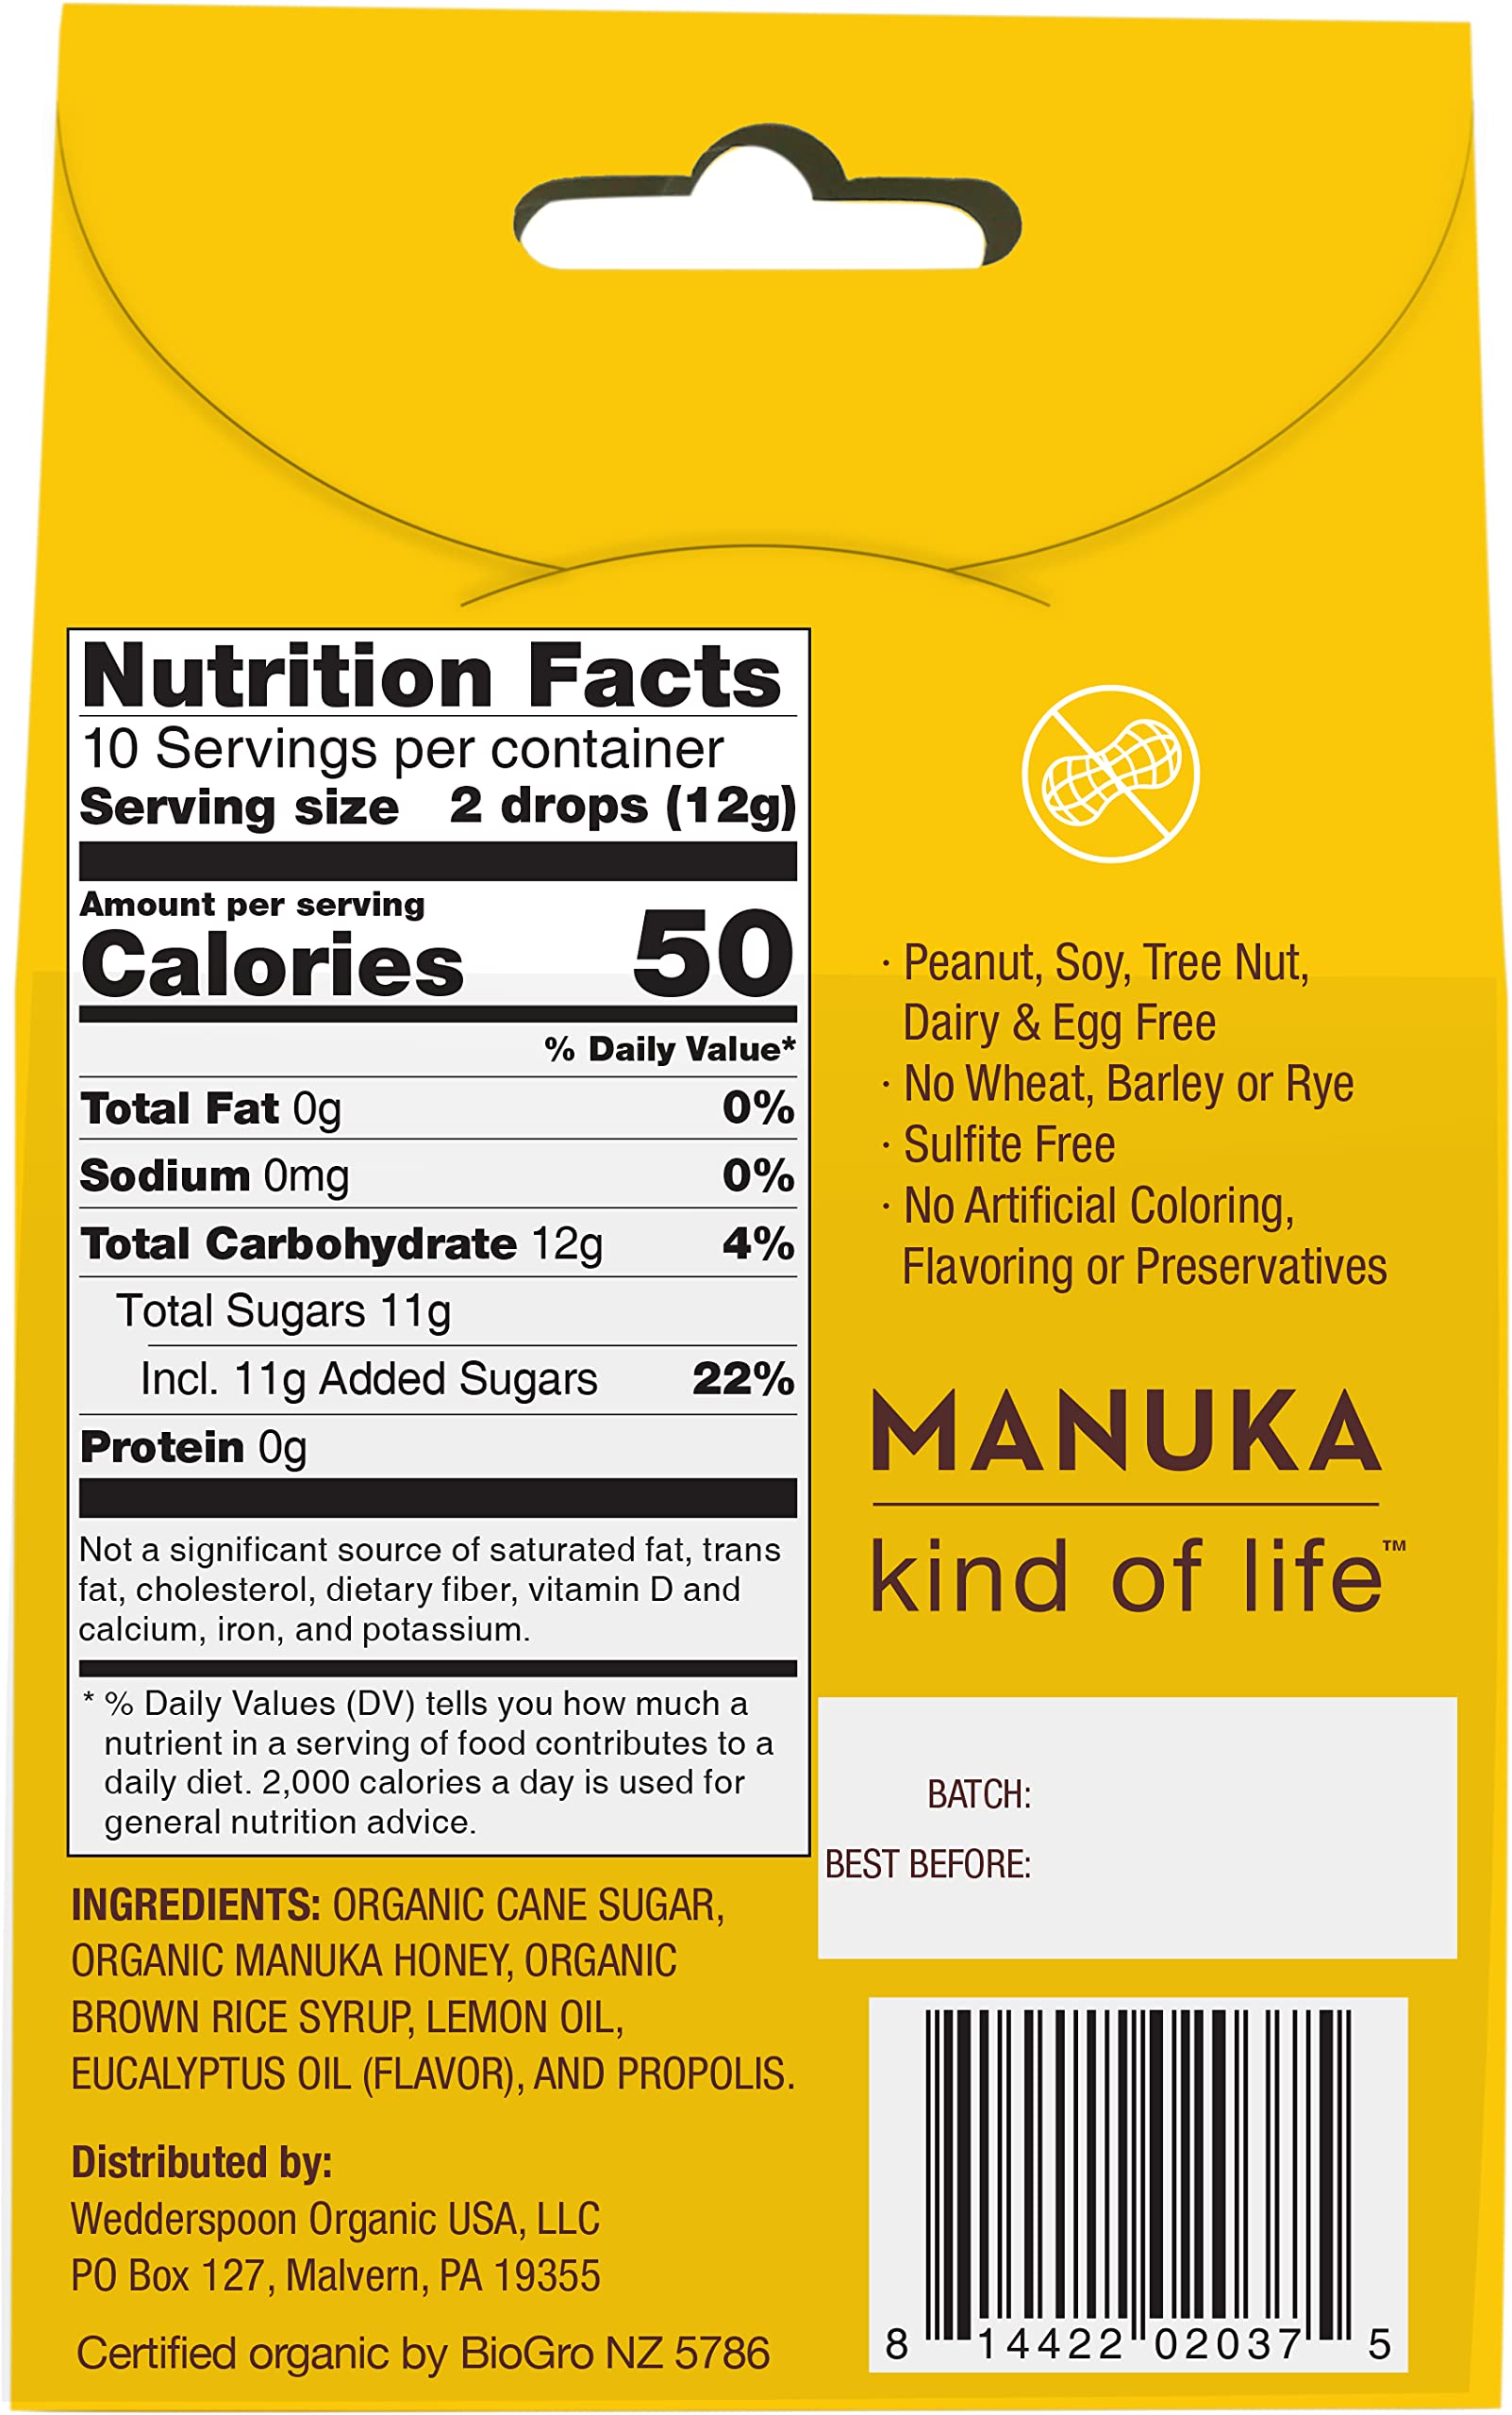 Wedderspoon Organic Manuka Honey Drops, Lemon & Bee Propolis, 20 Count (Pack of 1) | Genuine New Zealand Honey | Perfect Remedy For Dry Throats